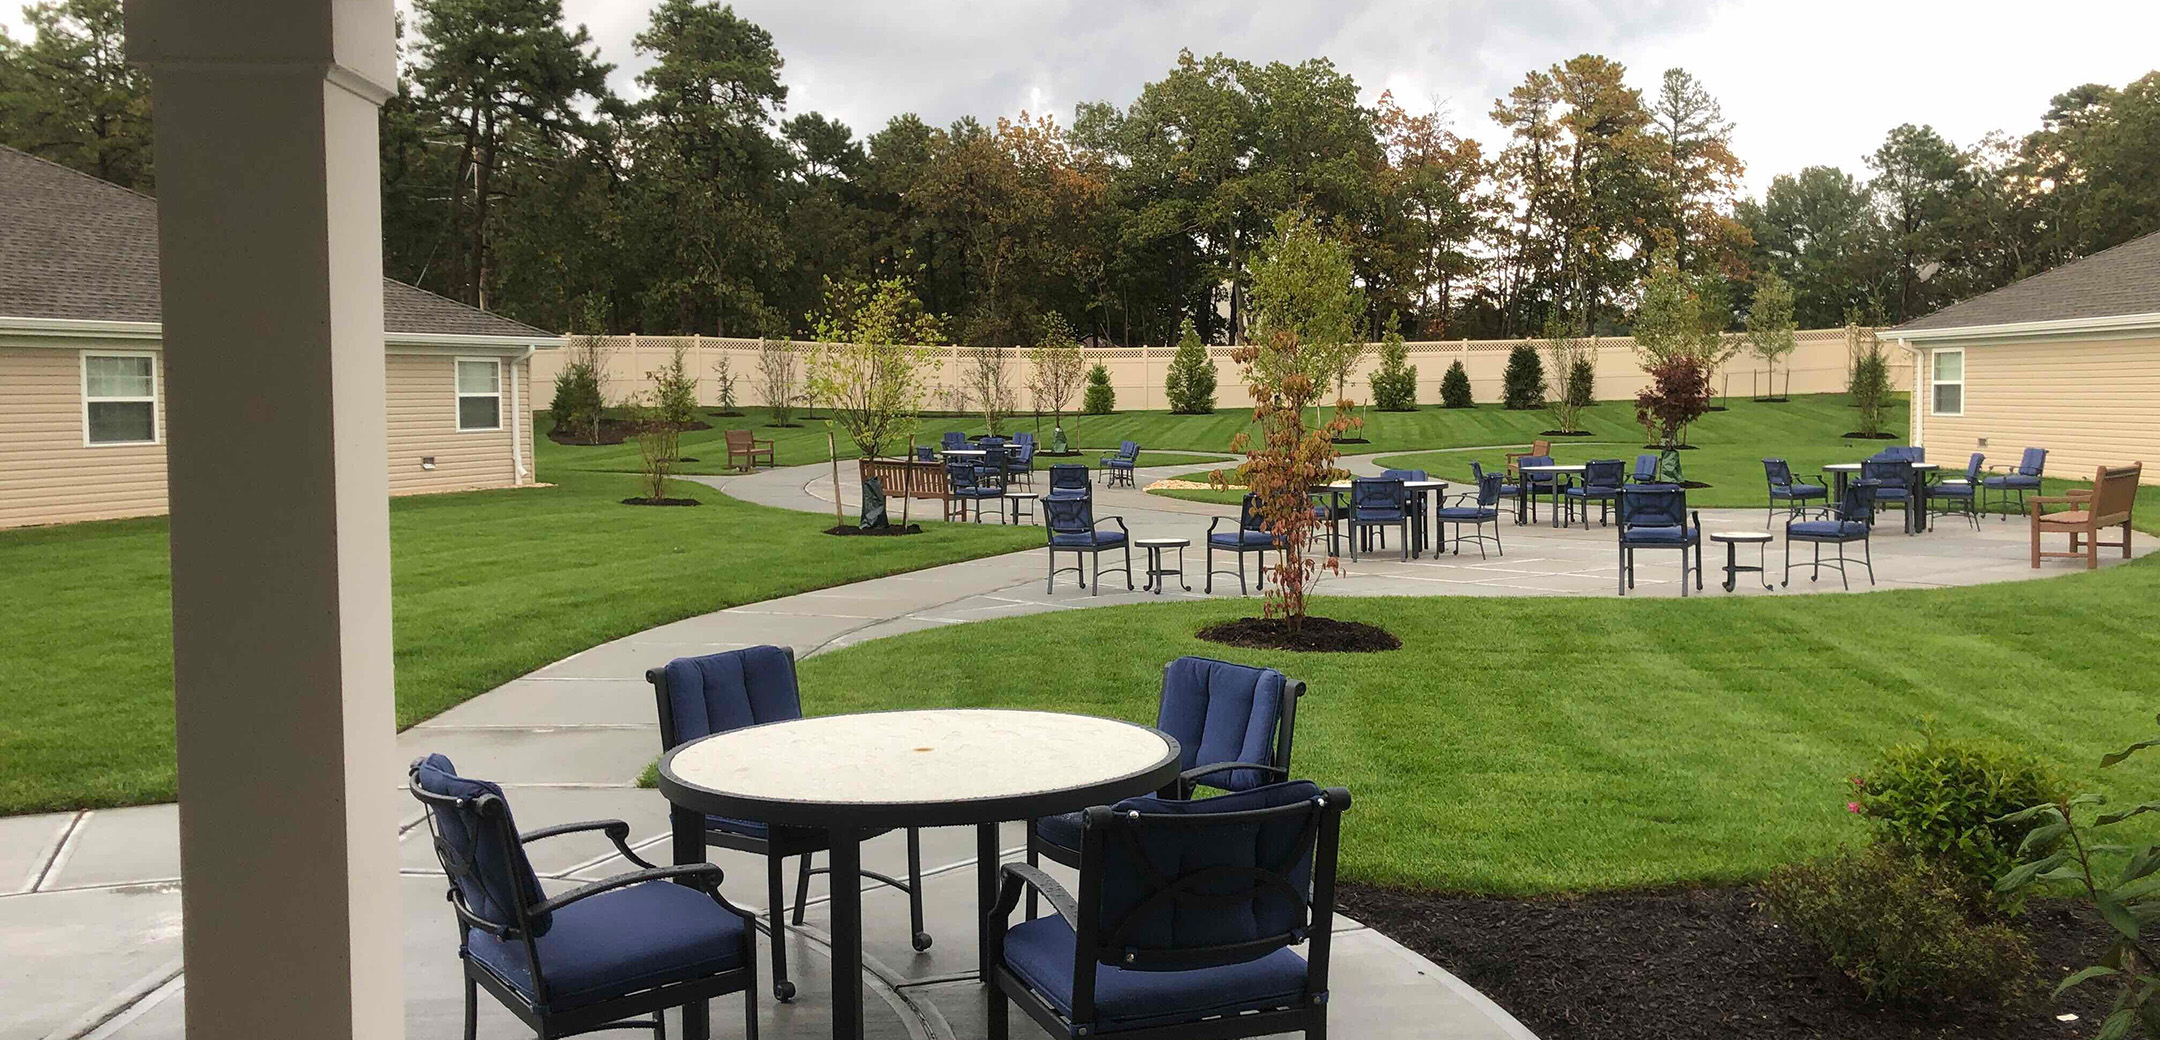 A close up exterior of the backyard of Artis Senior Living Brick with chairs and tables, a paved sidewalk going around the property, and landscaping.